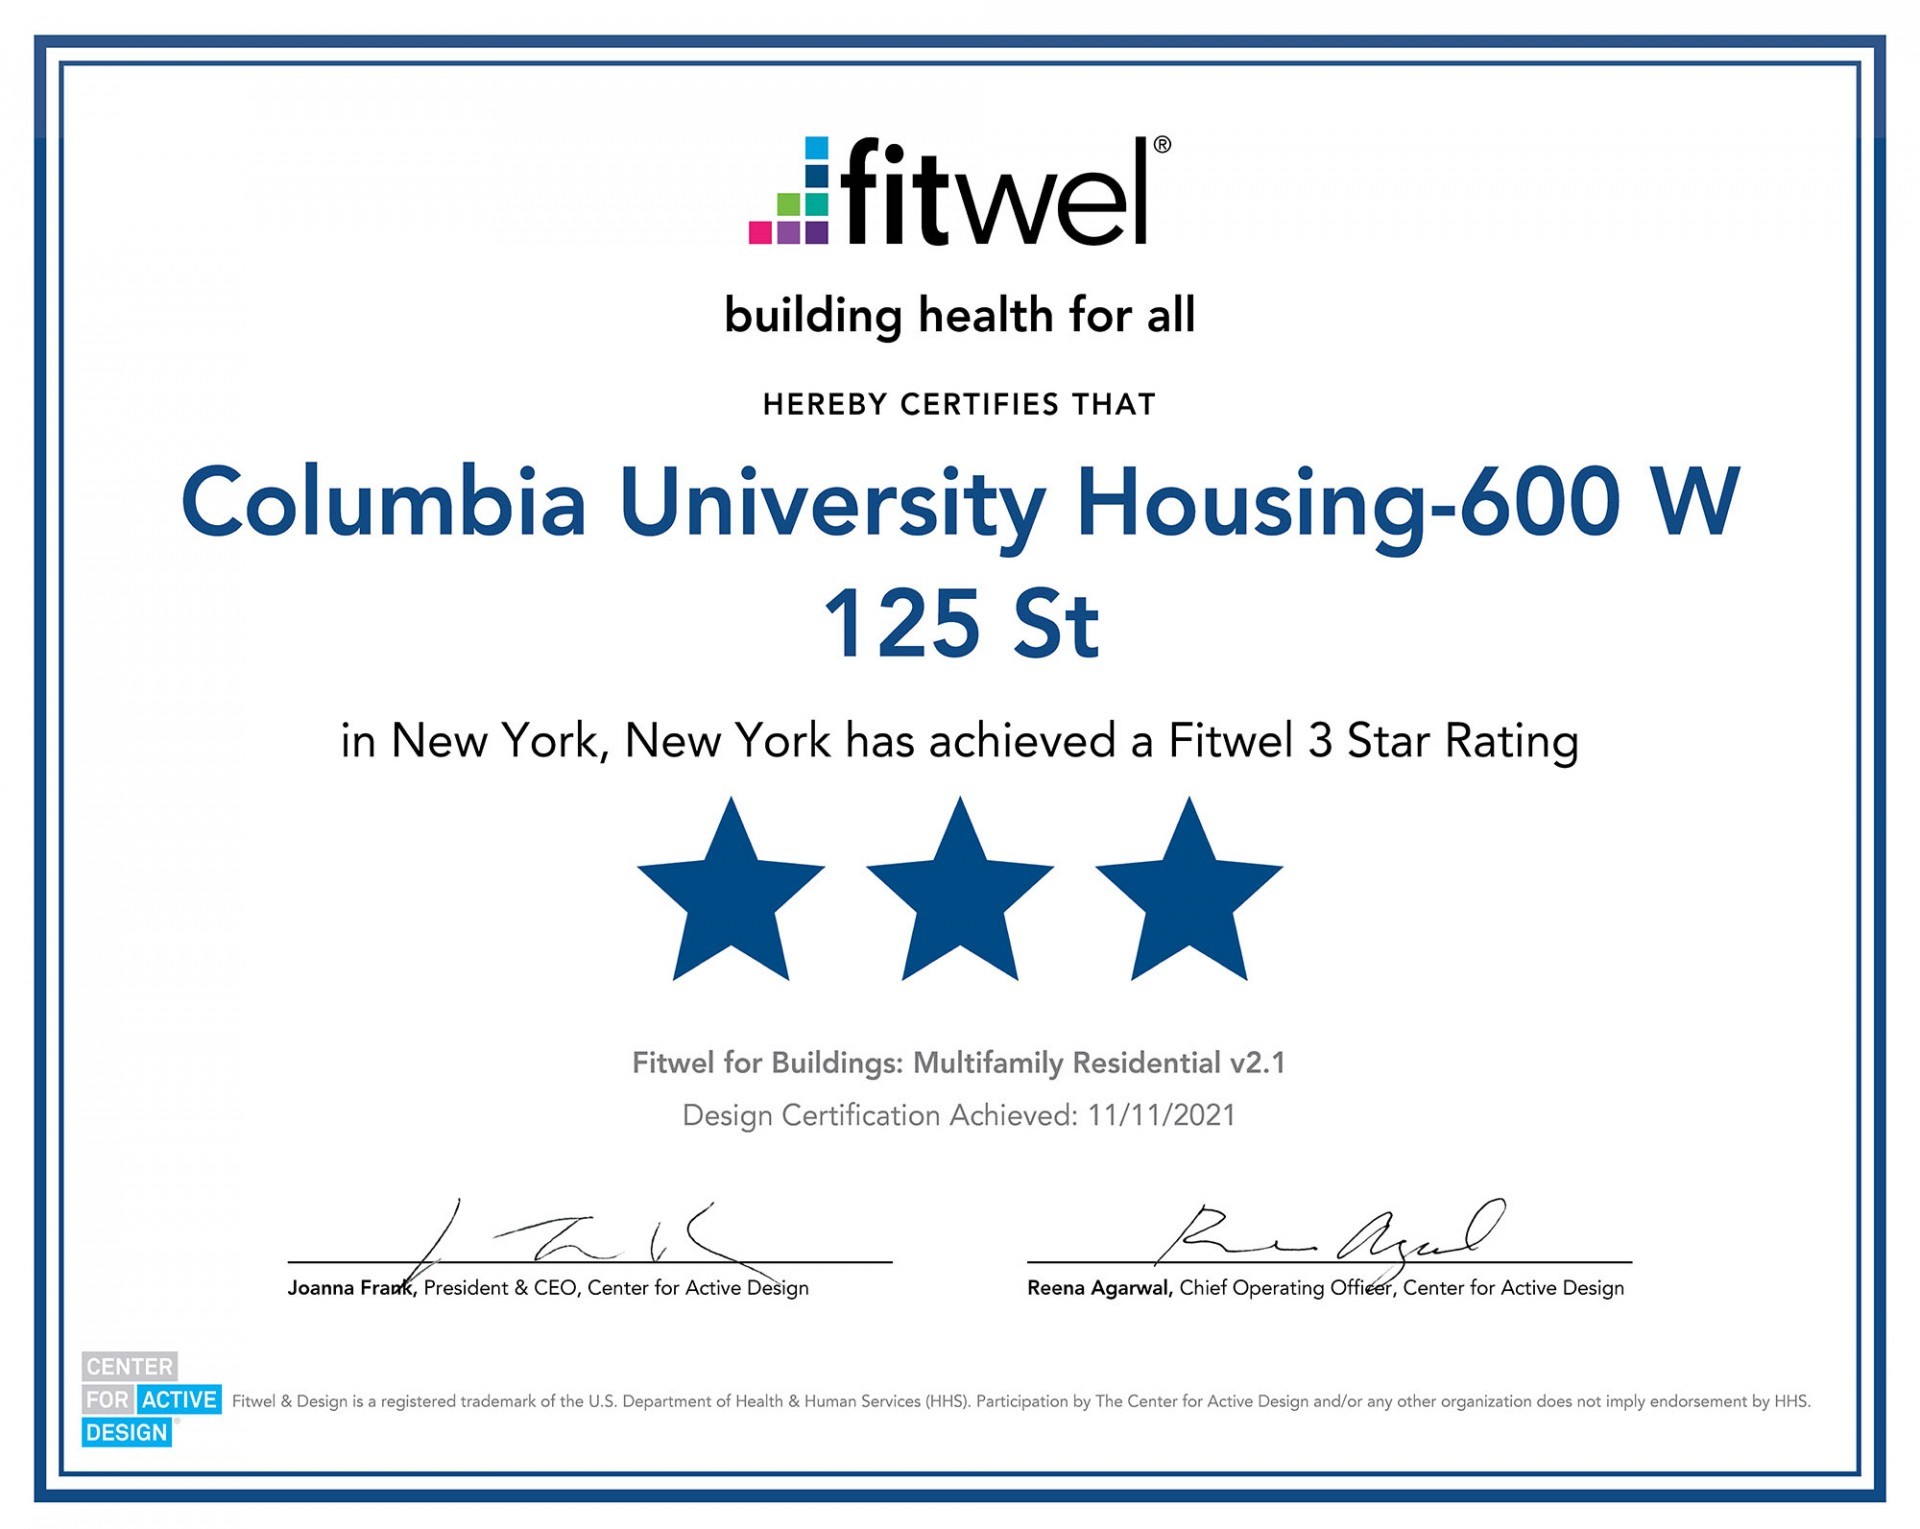 A certificate from Fitwel that certifies Columbia's new residential building at 600 W. 125th Street has achieved a Fitwel 3 star rating.